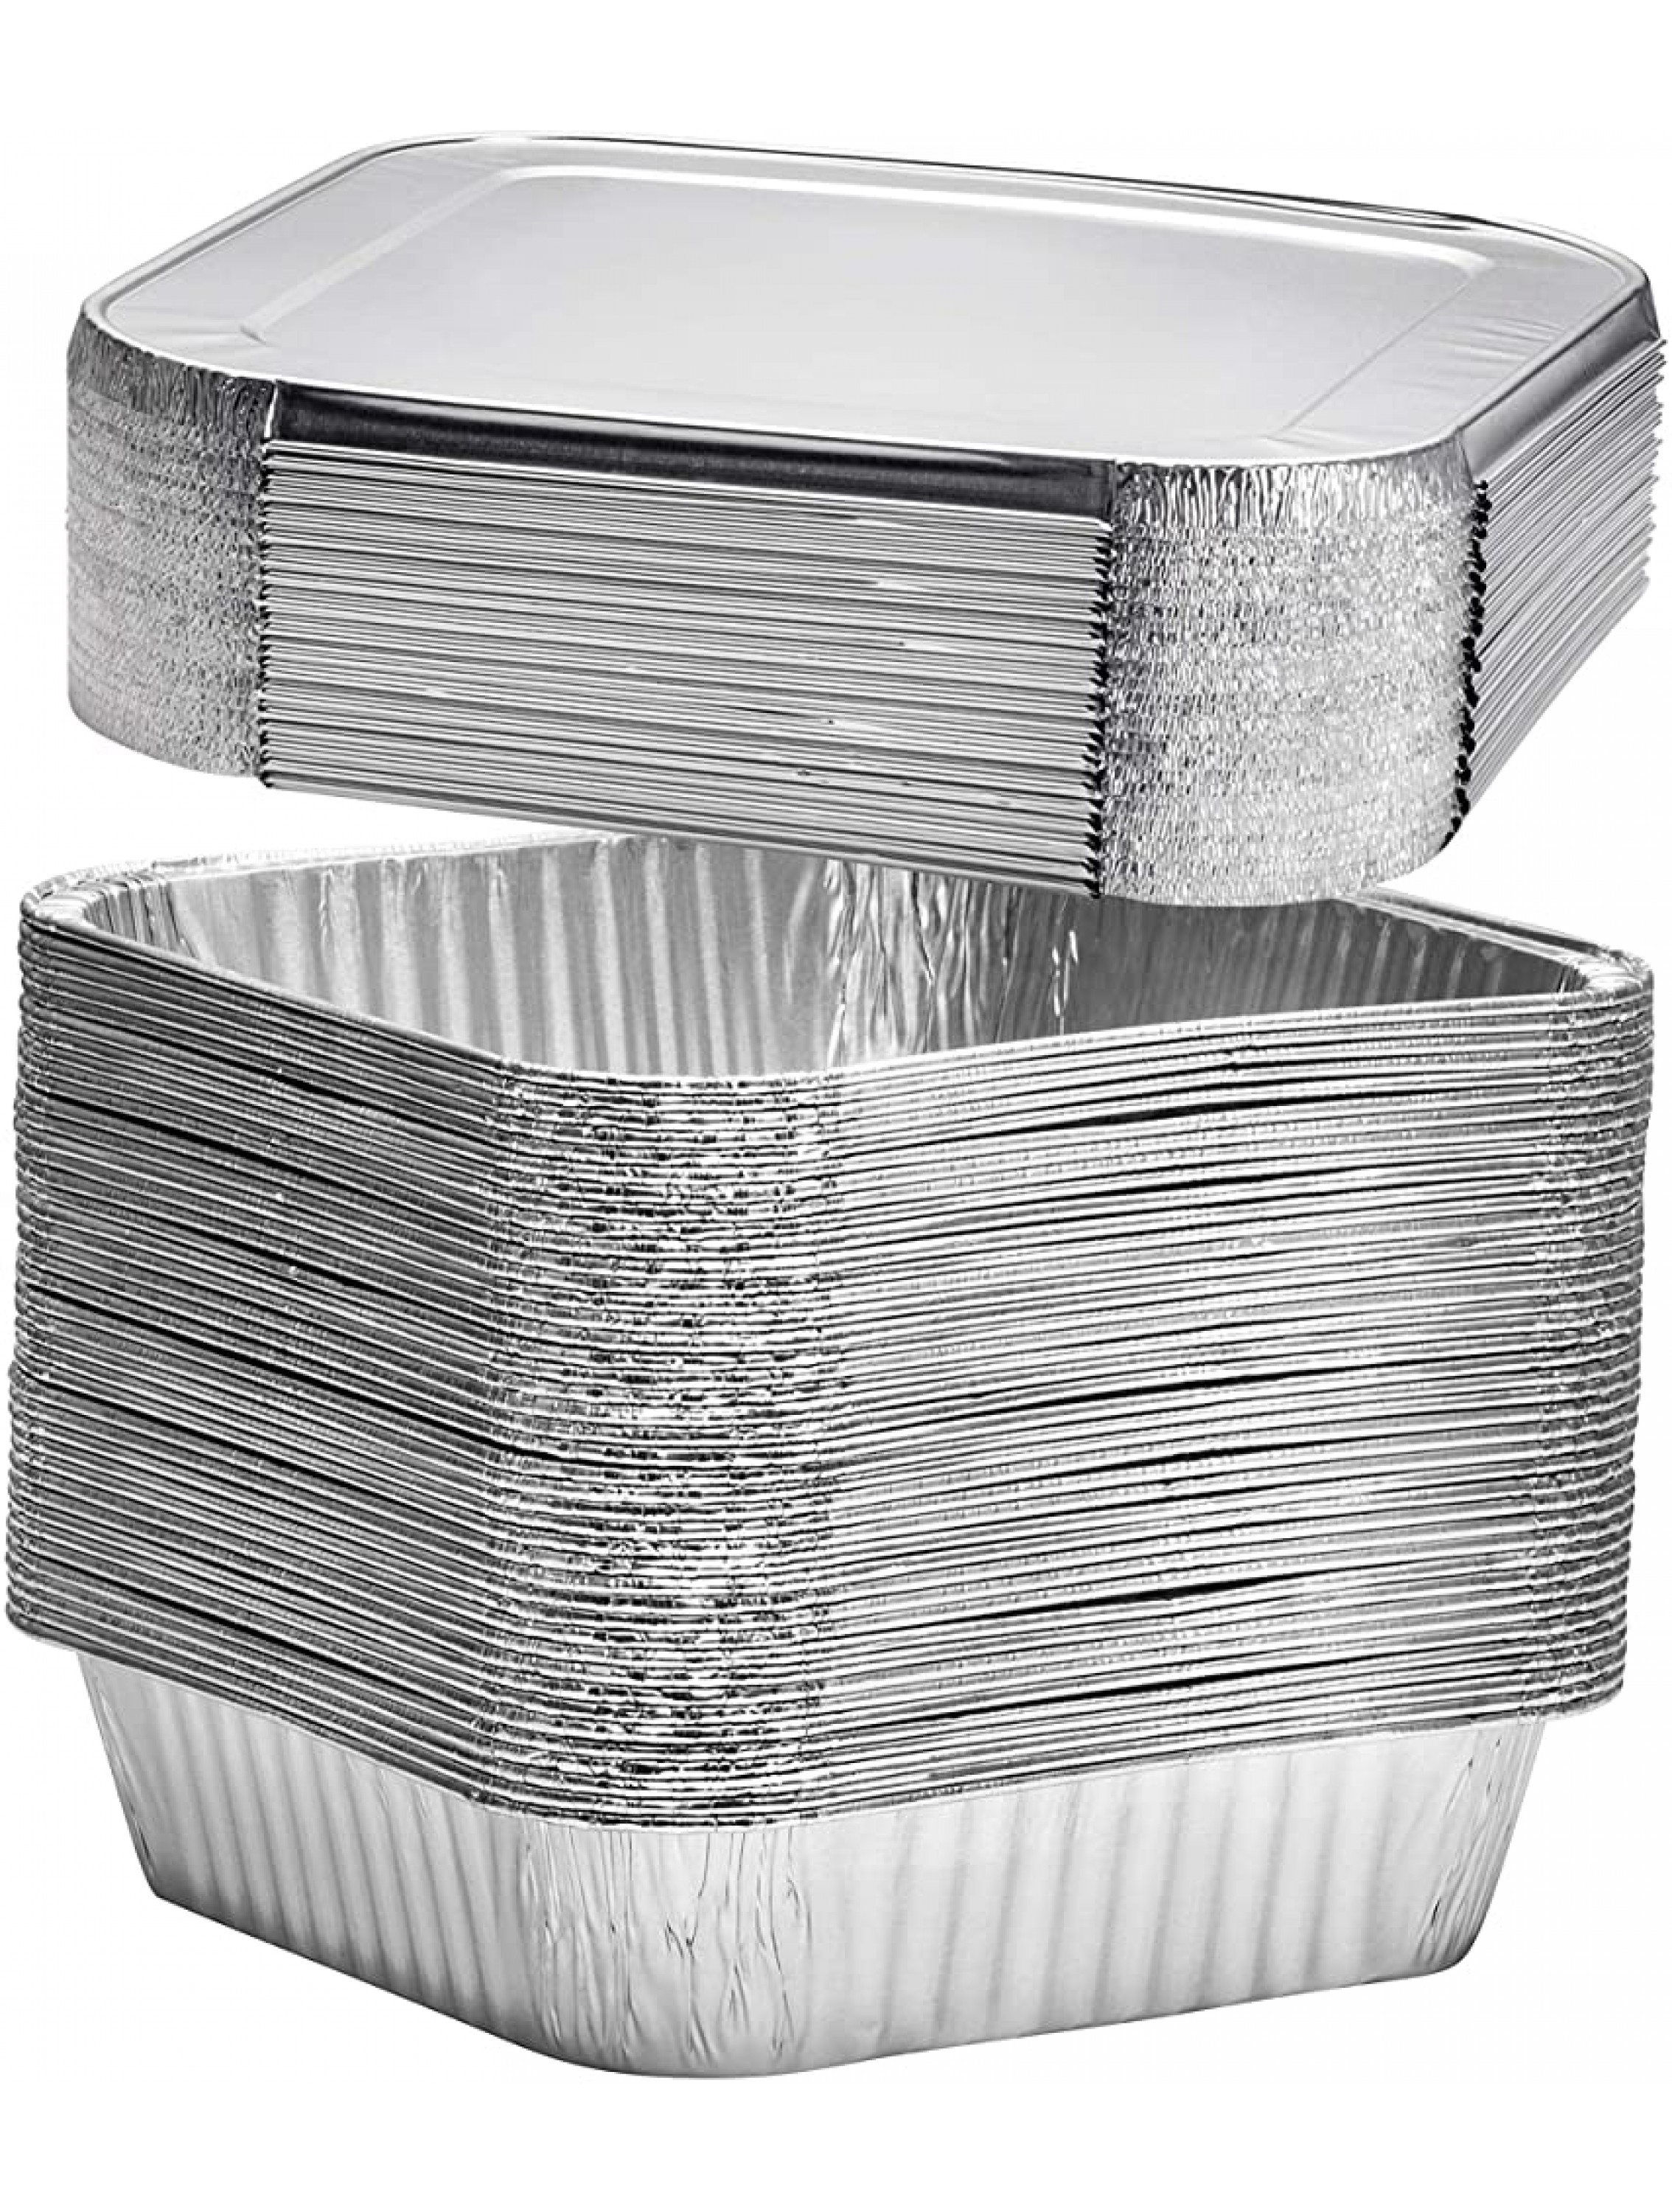 8 Square Disposable Aluminum Cake Pans Foil Pans perfect for baking cakes roasting homemade breads | 8 x 8 x 2 in with Flat Lids 20 count - BF0J61CI4